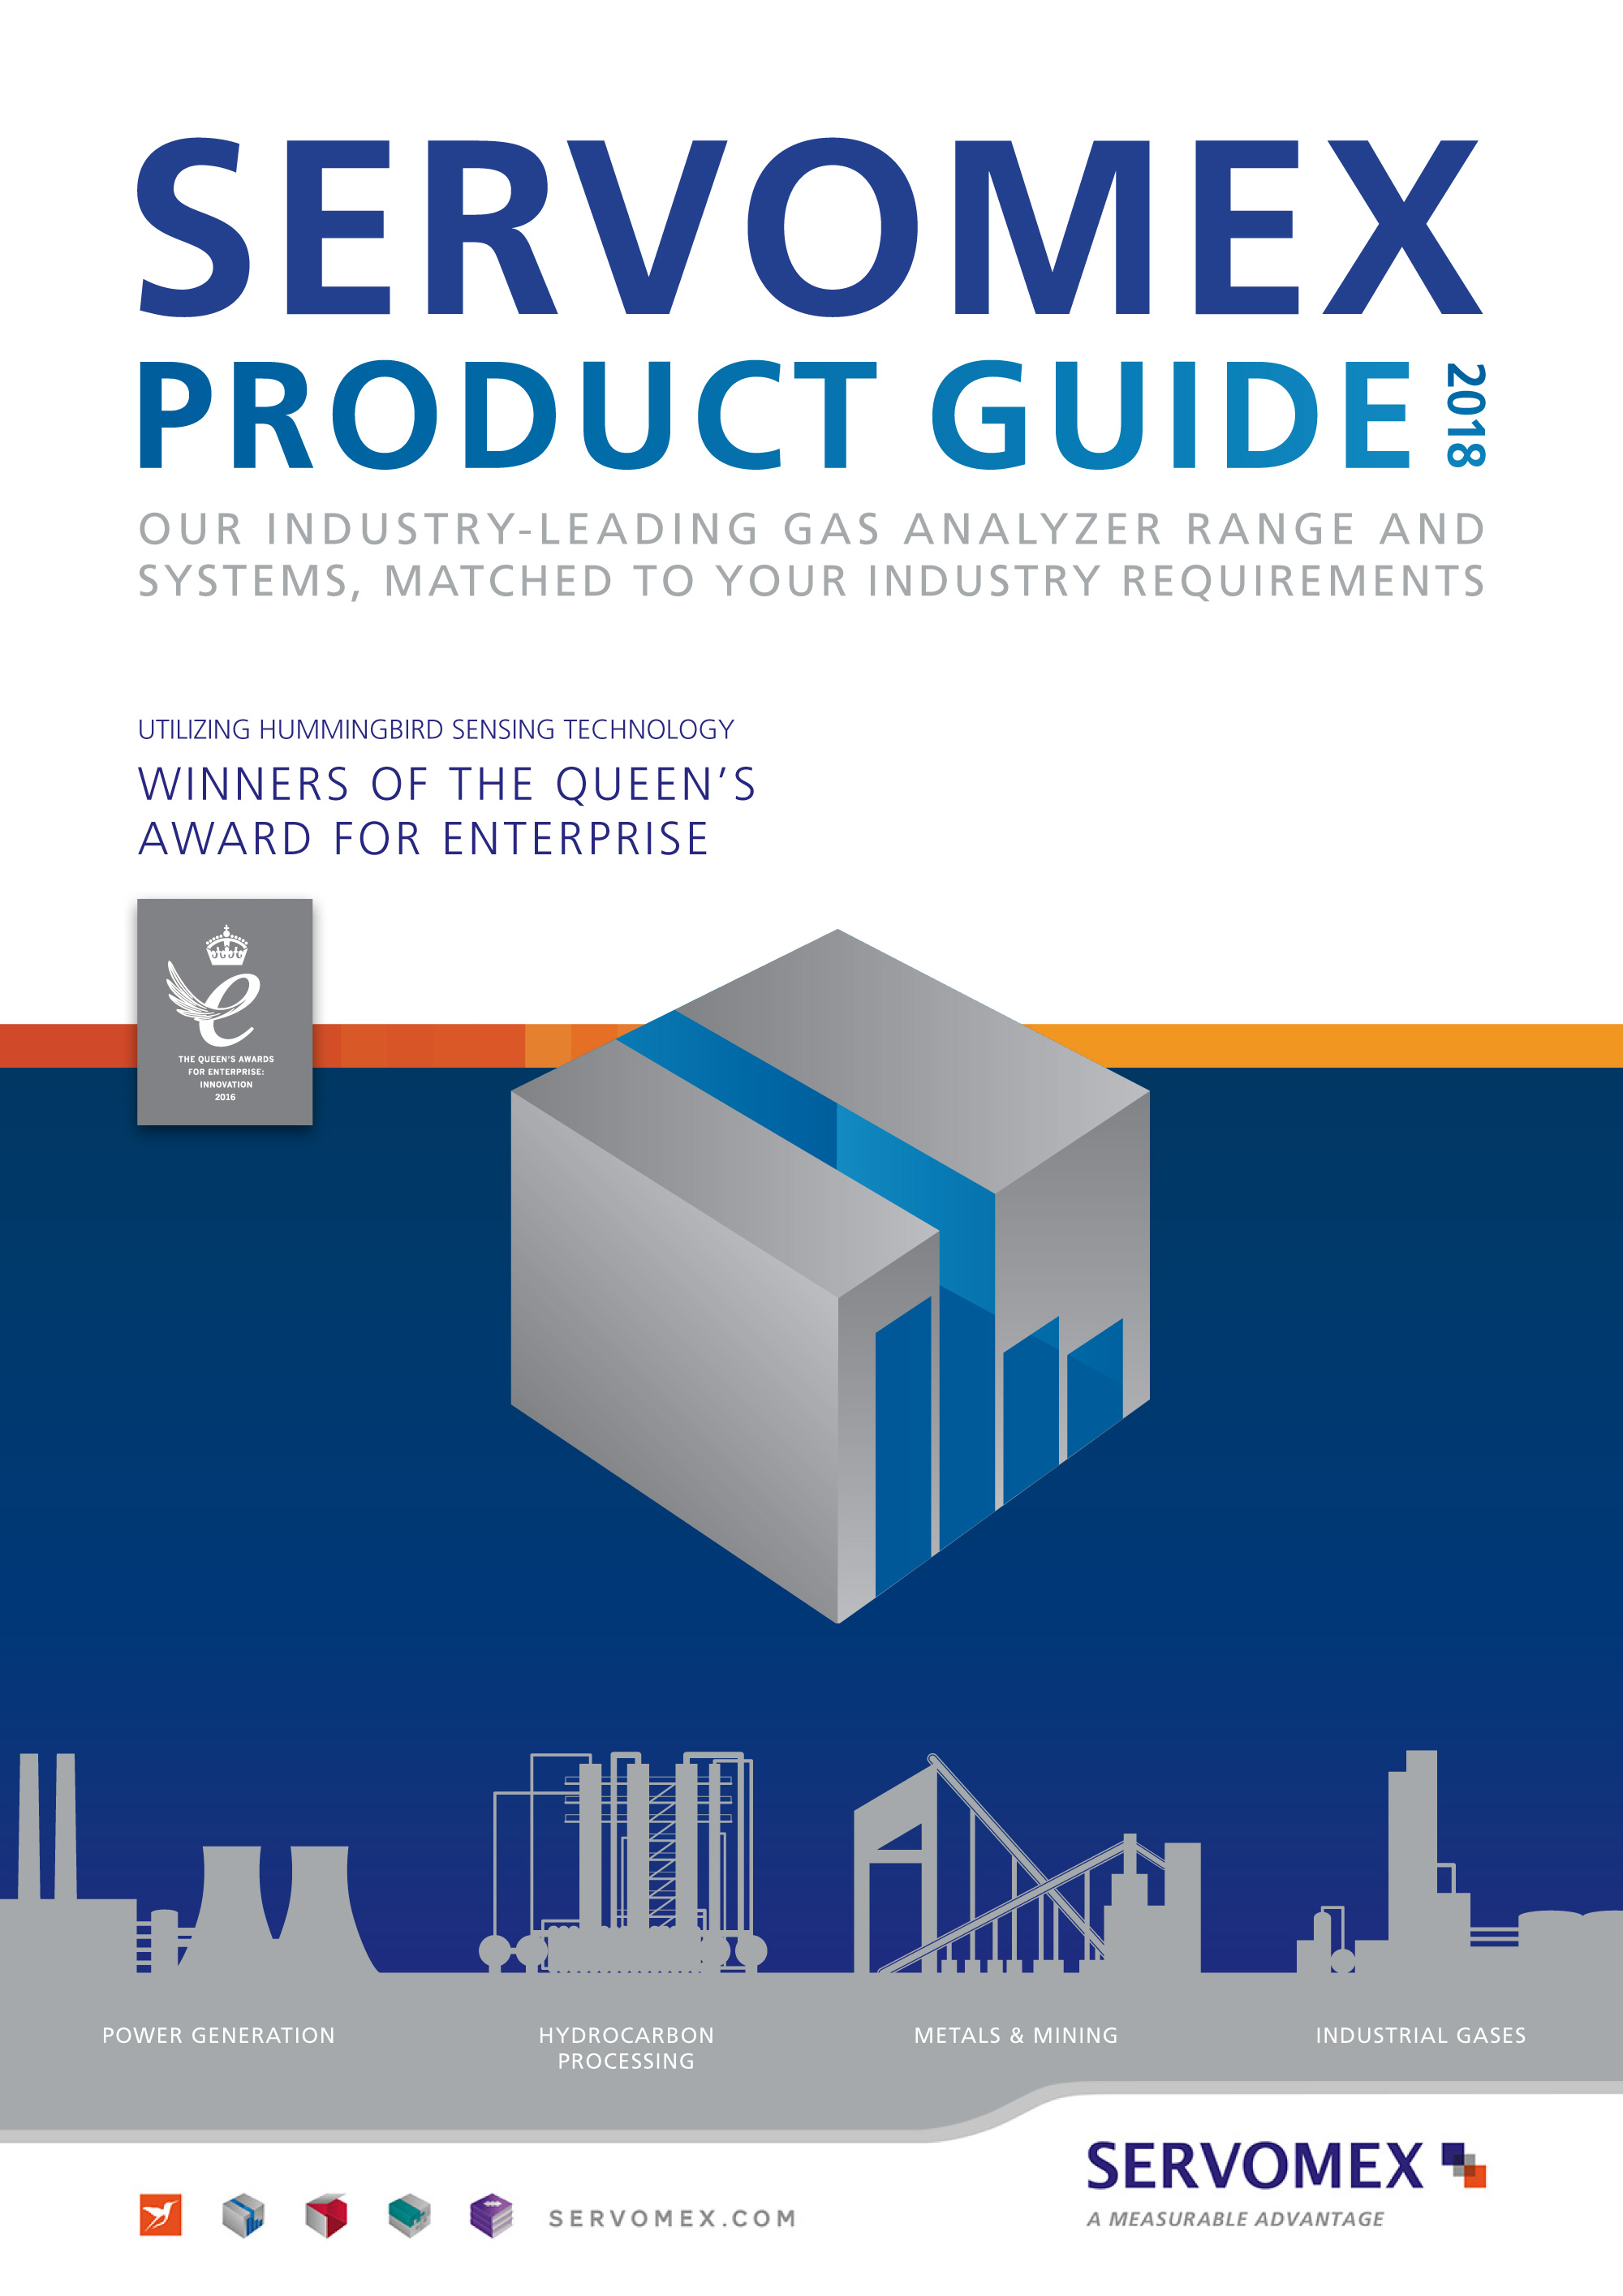 2018 New Product Guide for Servomex Product - Check out the new product guide on what Servomex can offer for your applications in 2018.